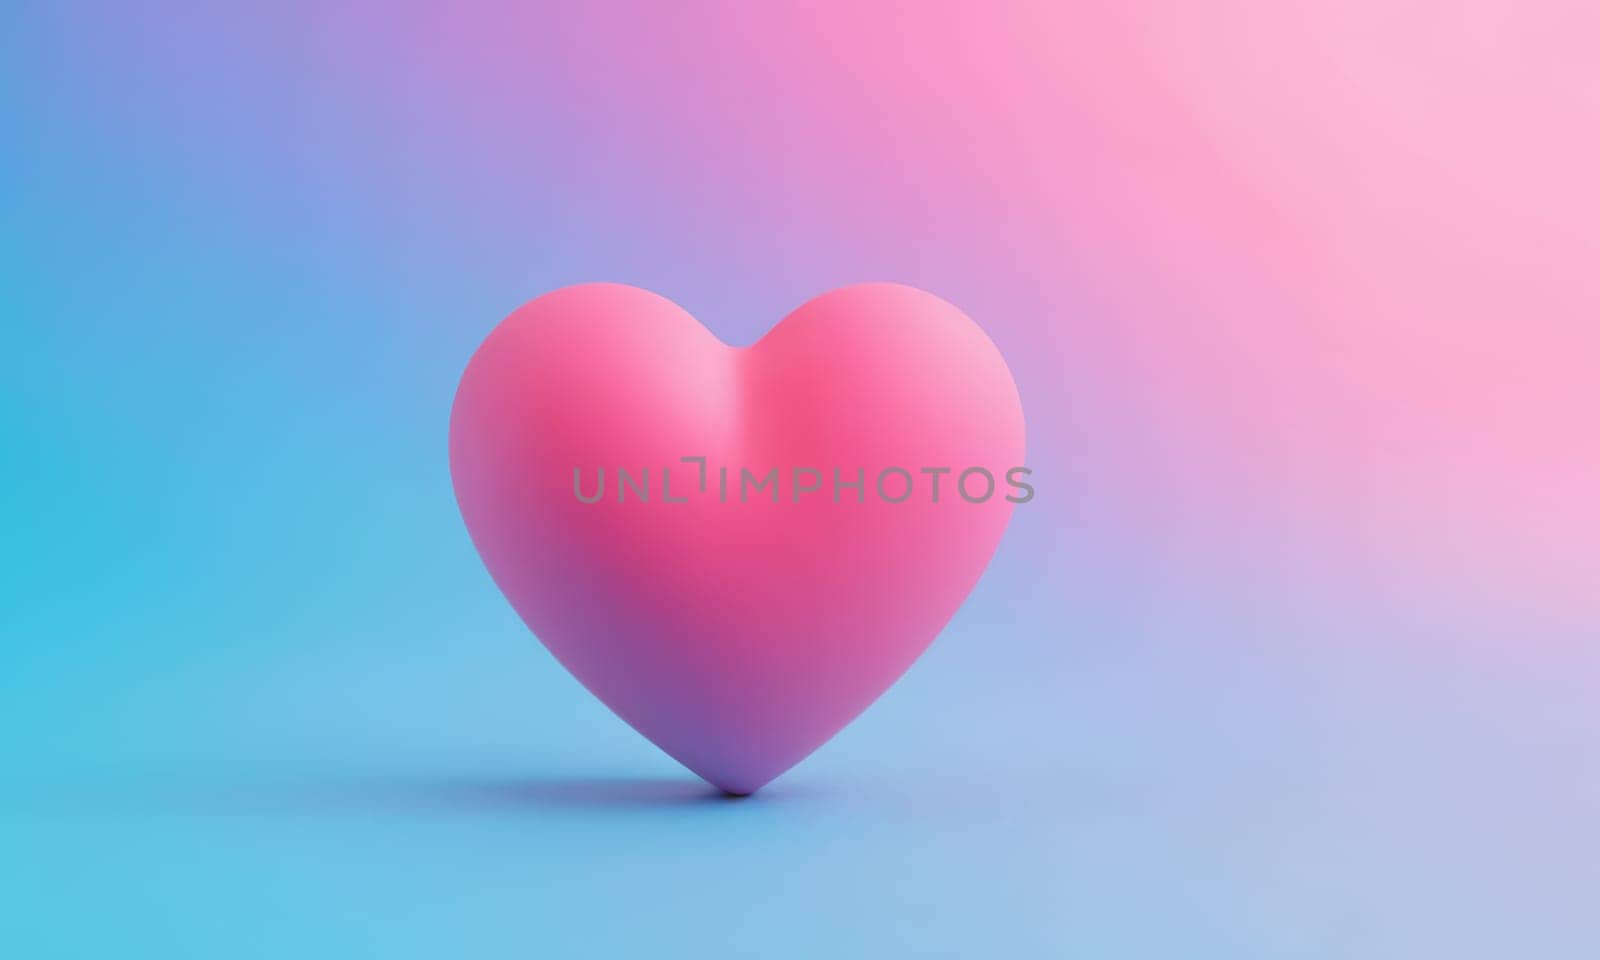 A glossy pink heart stands out against a vibrant blue background. The image exudes warmth and affection and is perfect for themes of love and romance. Ideal for Valentine s Day promotions or expressing sentiments of love.